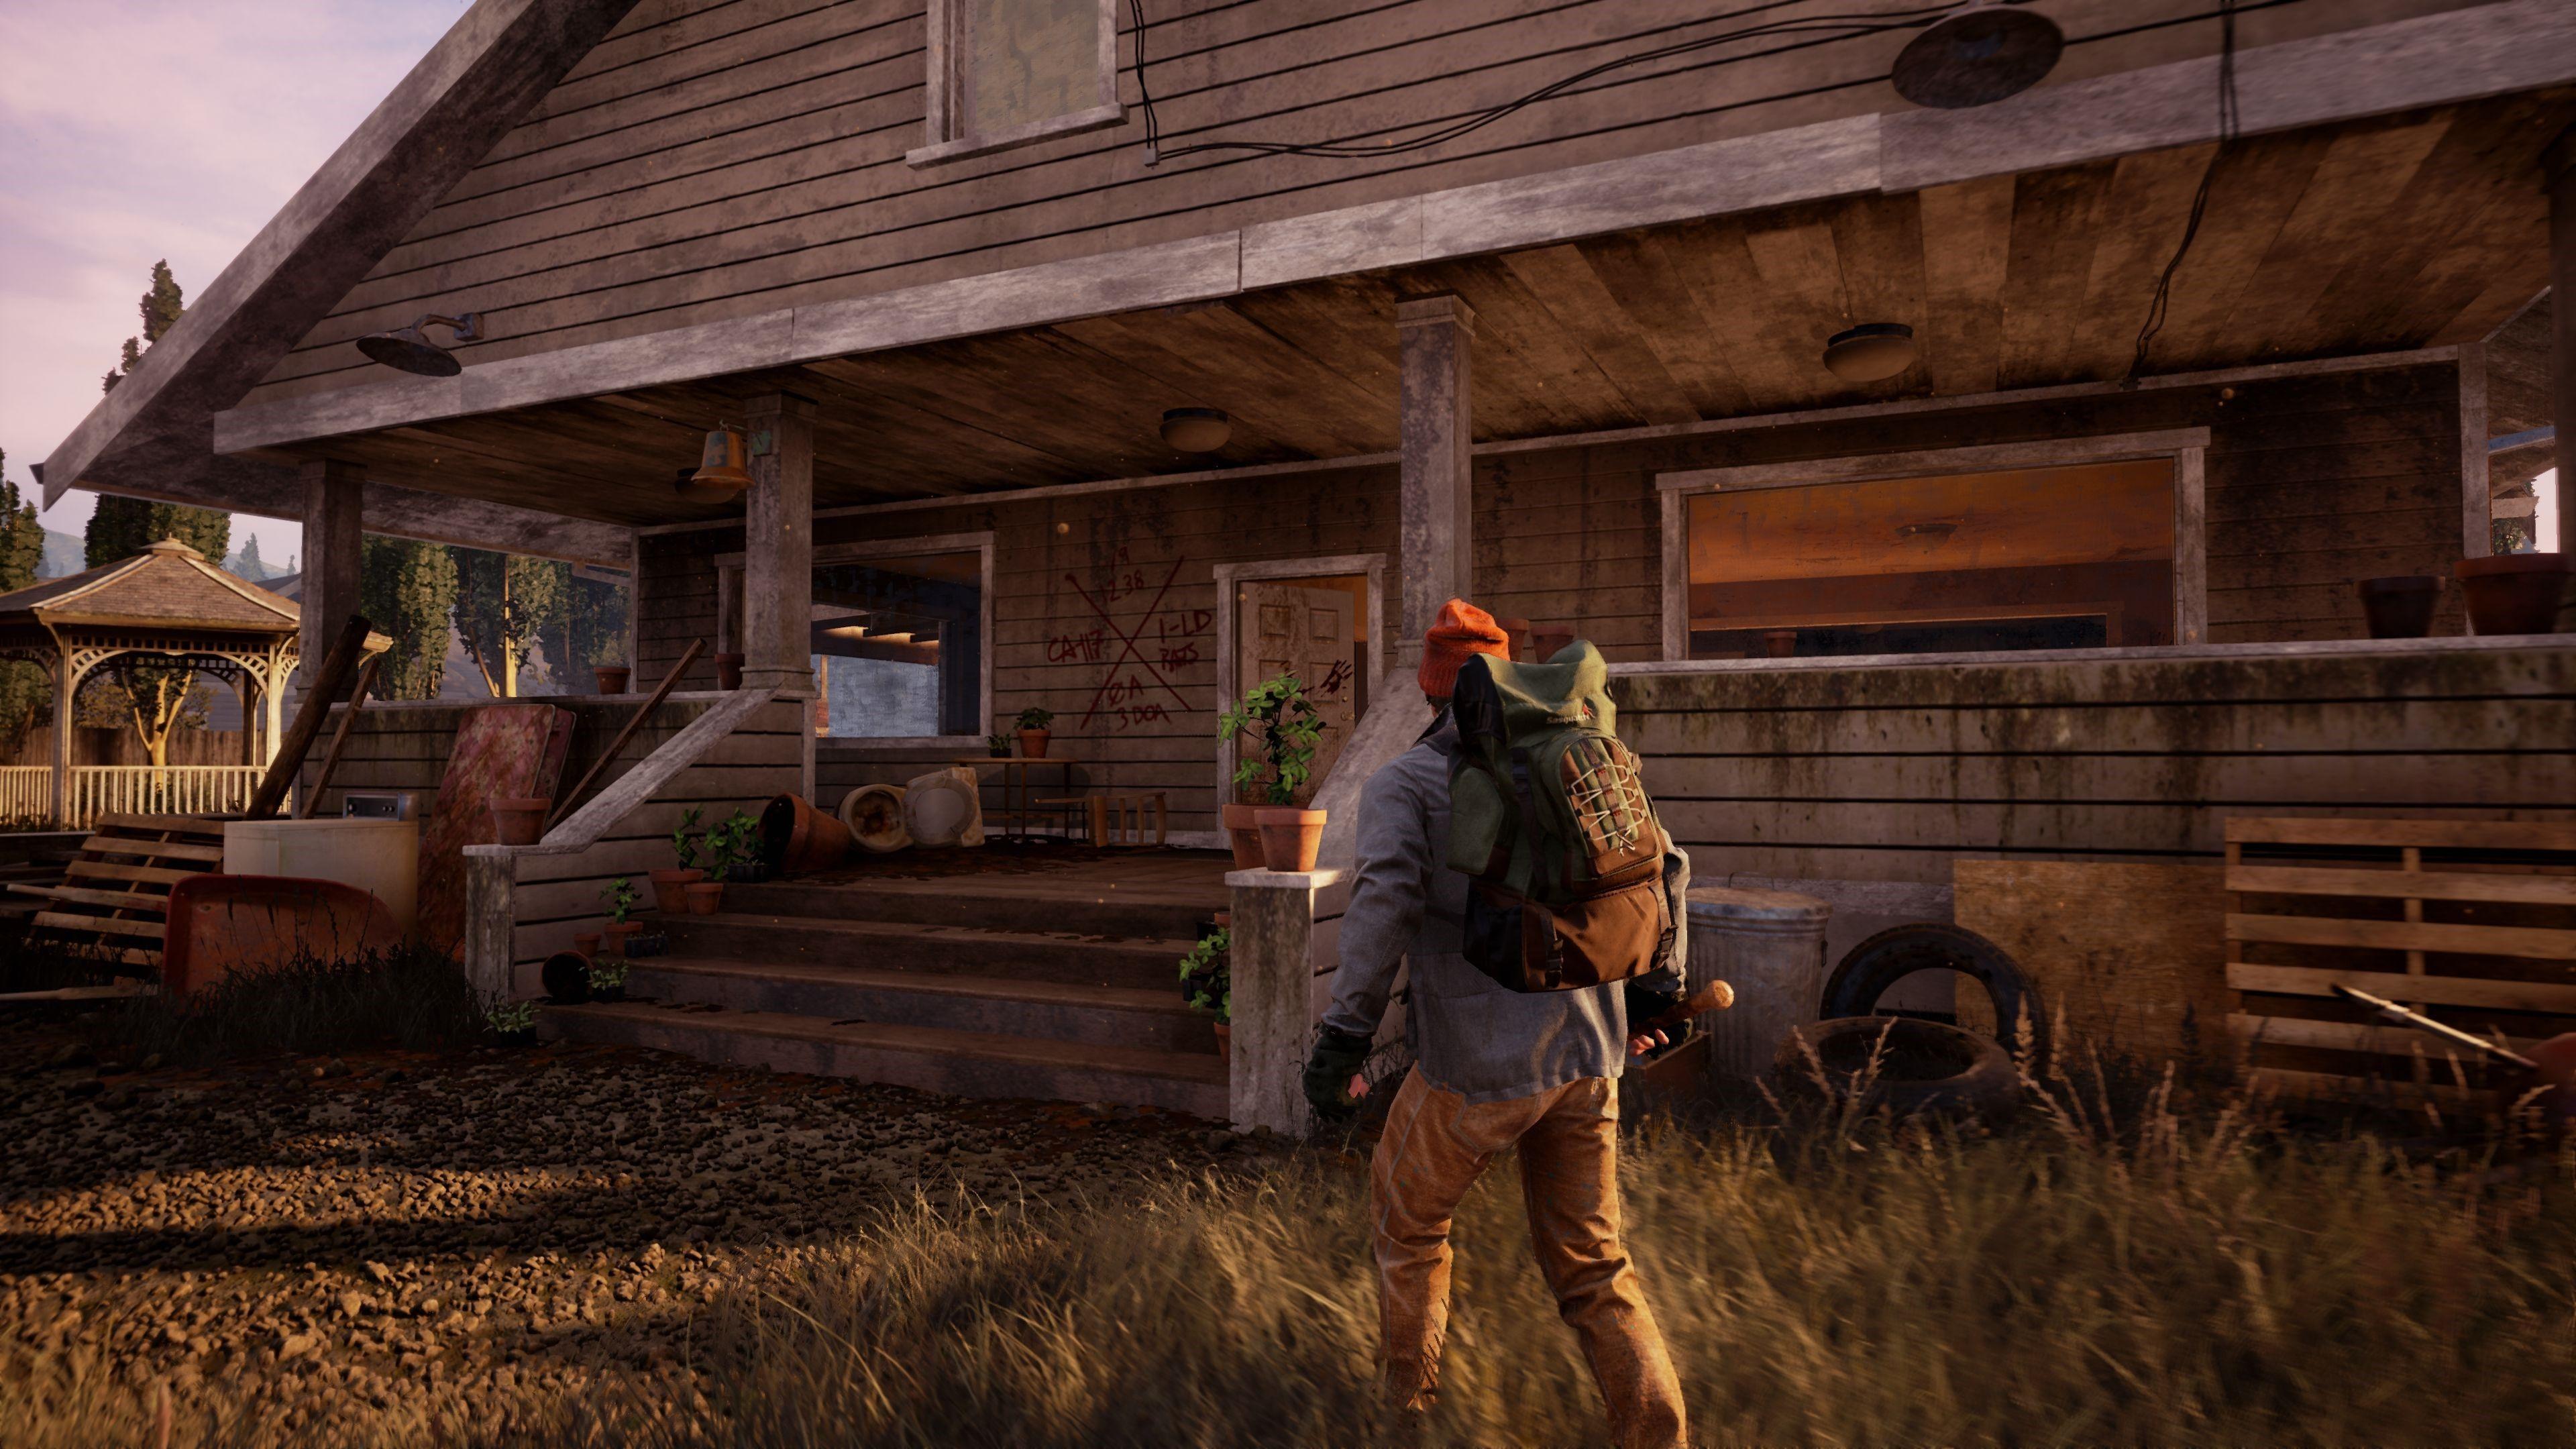 100+] State Of Decay 2 Wallpapers